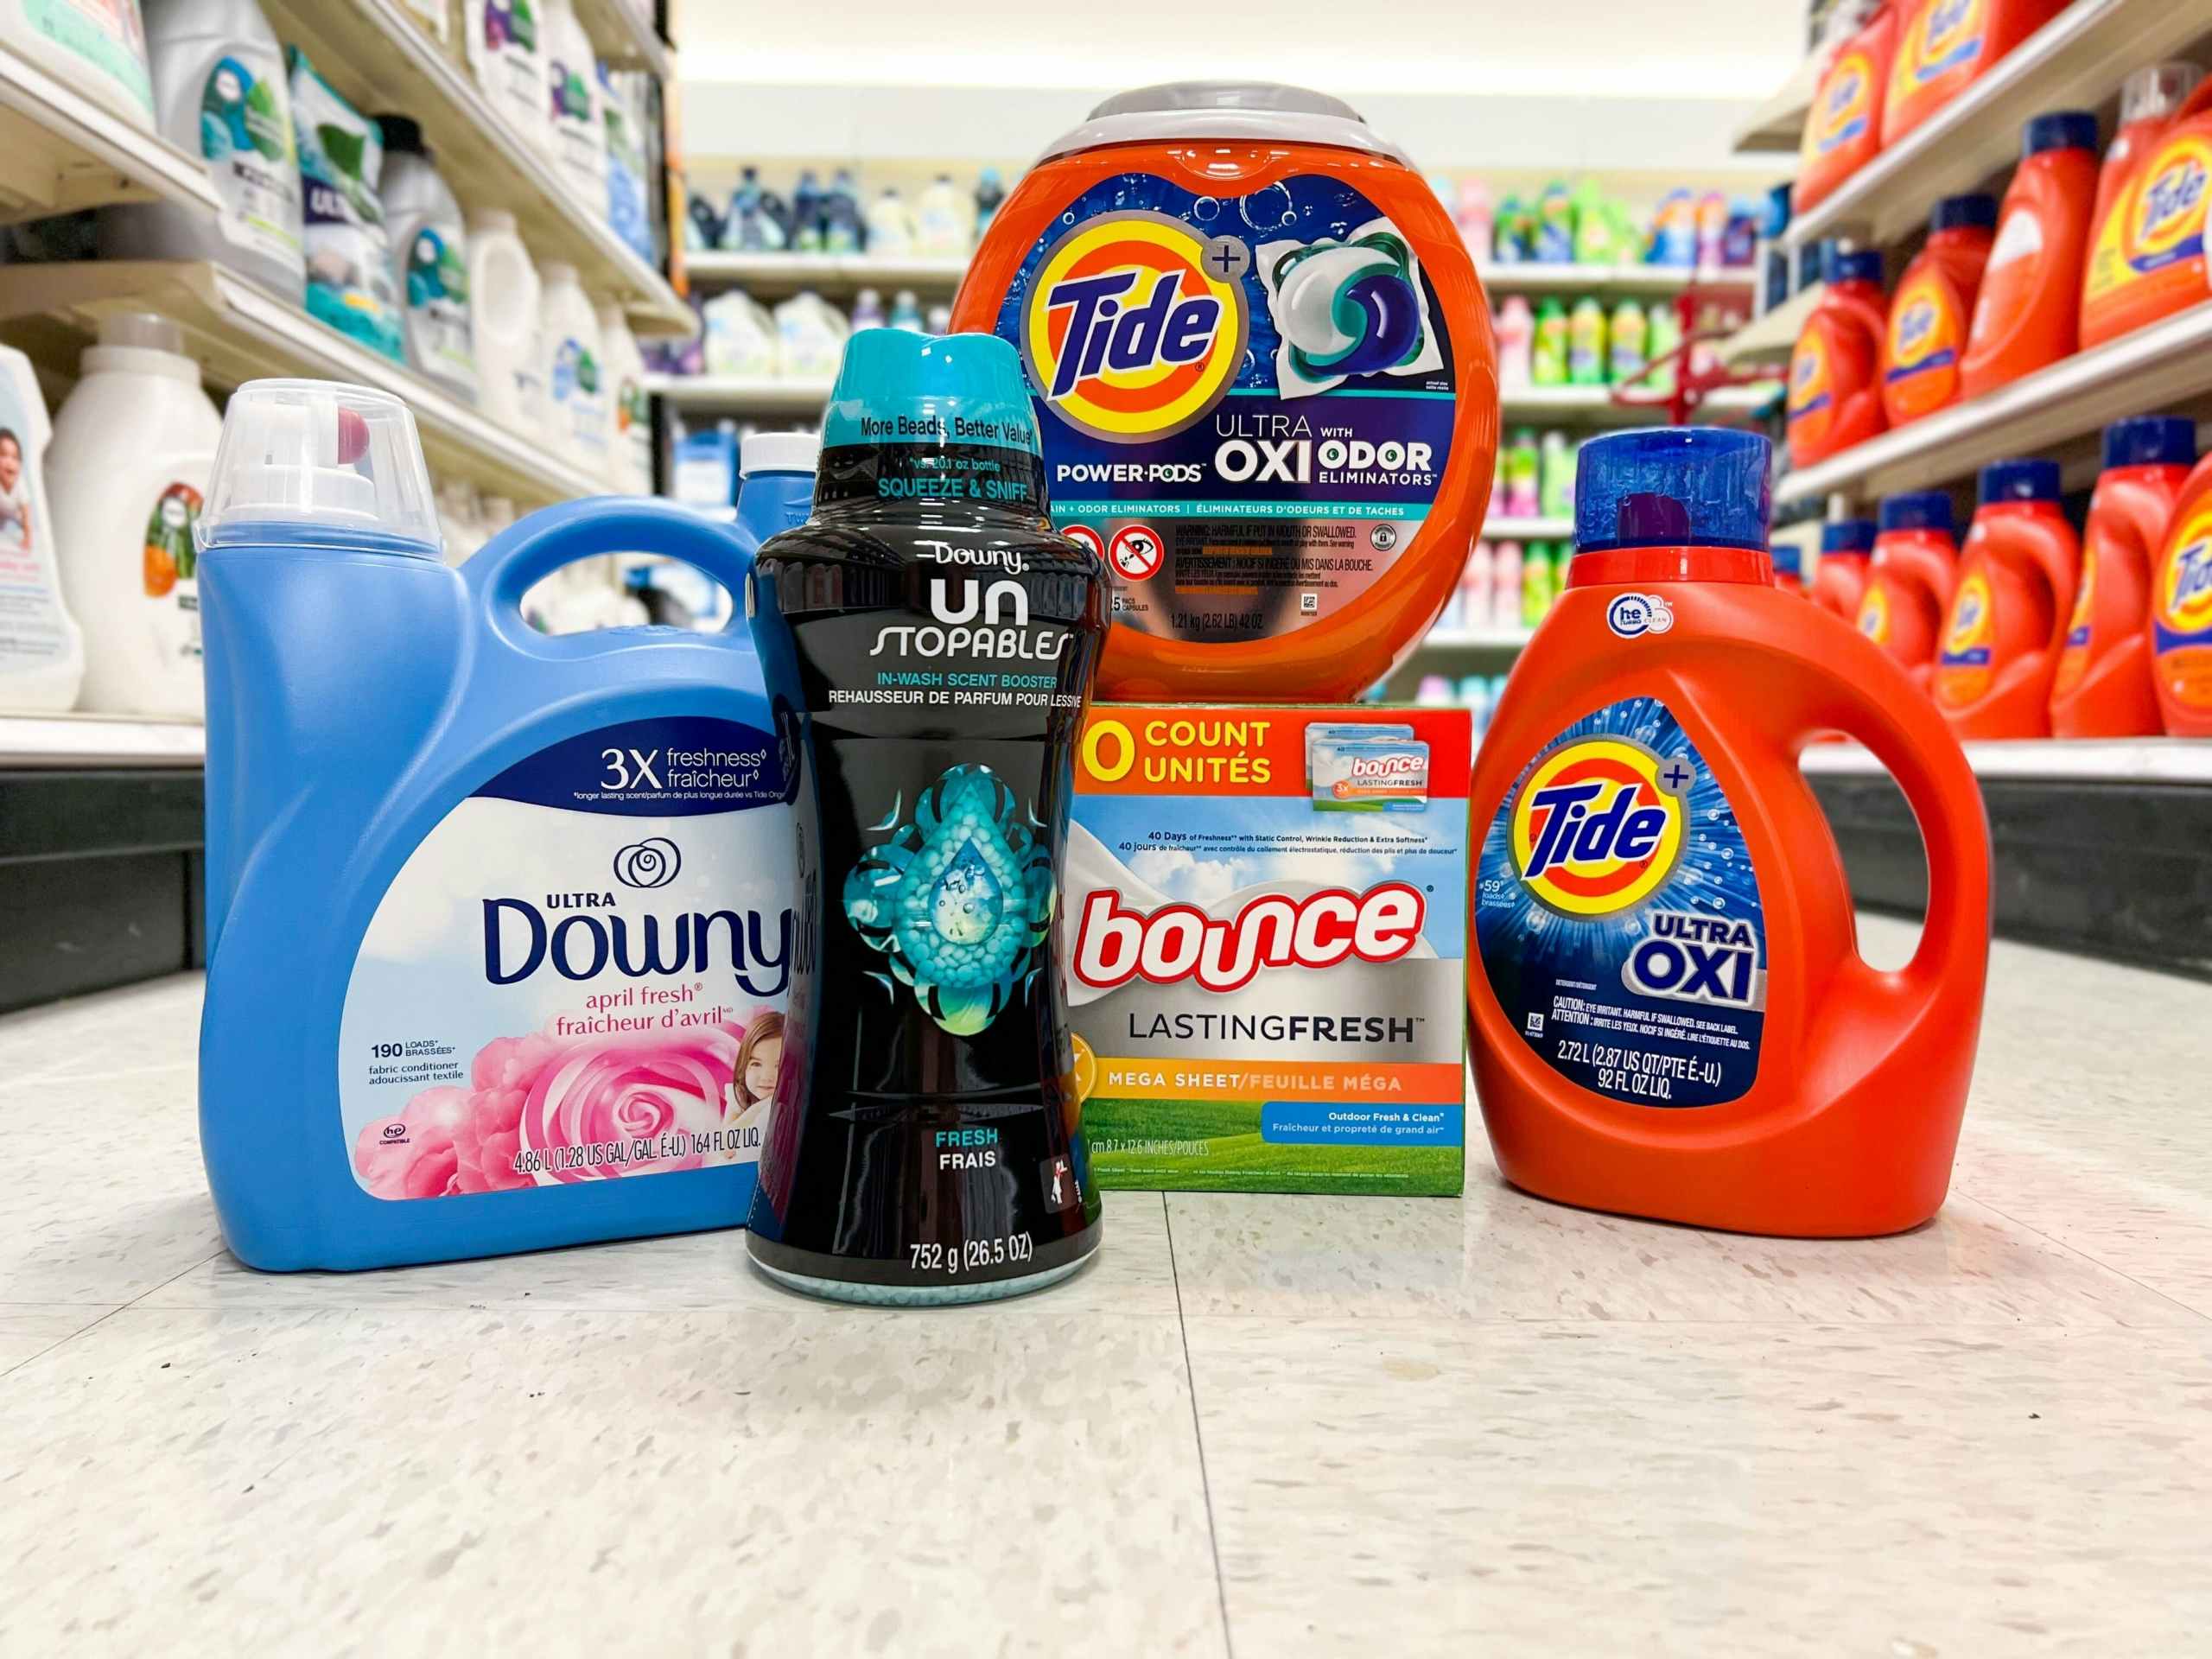 tide, downly, and bounce laundry products in a target aisle